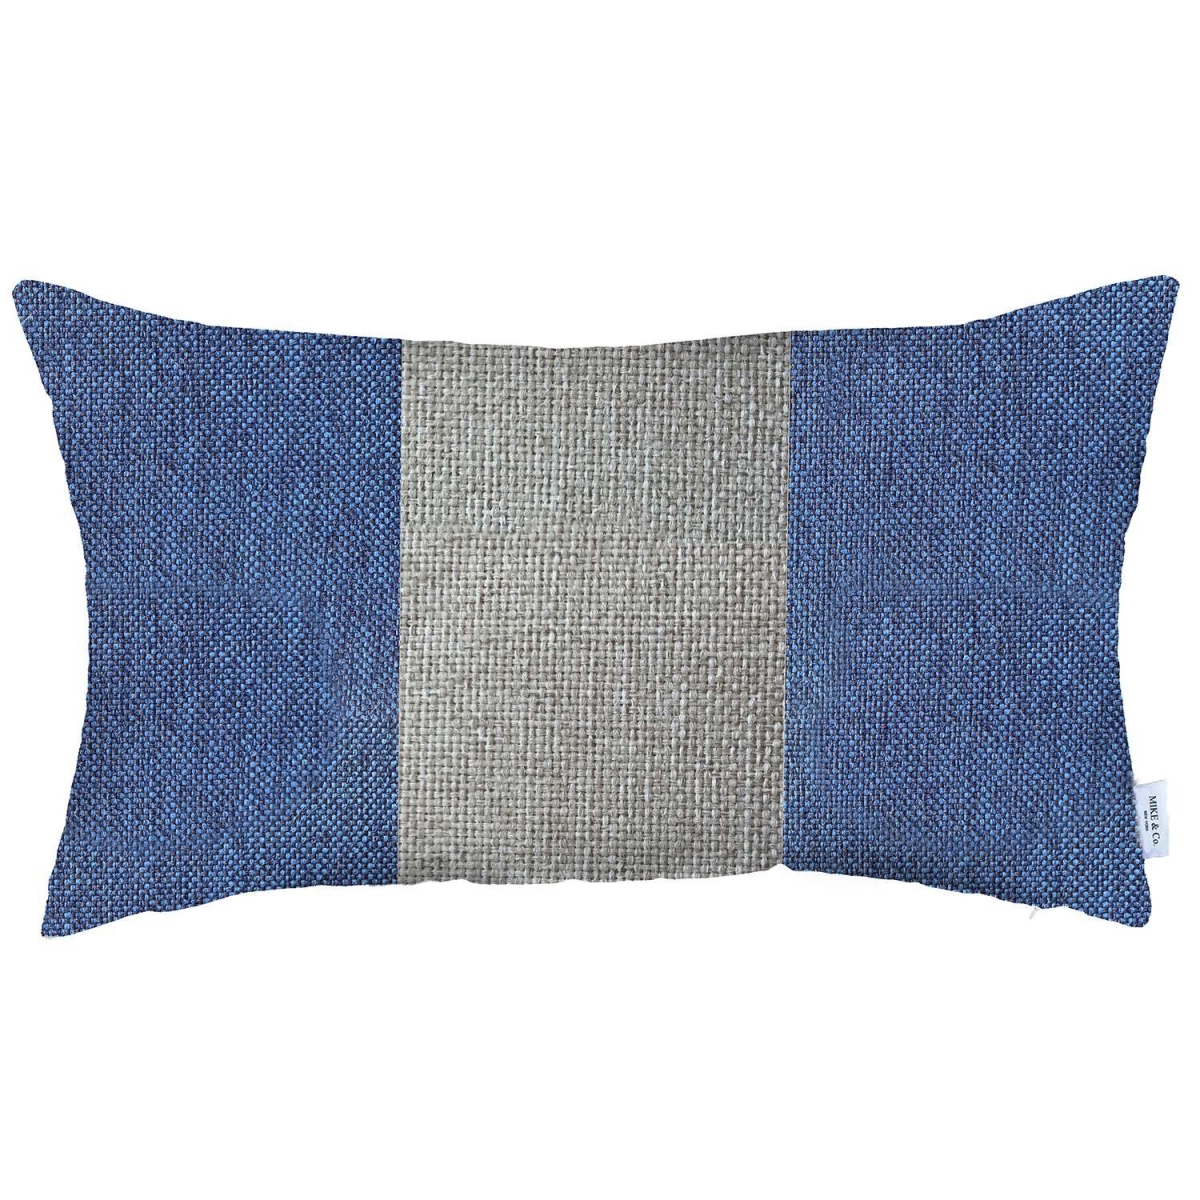 PalaceDesigns 0.1 x 12 x 20 in. Blue & Gray Geometric Zippered Handmade Polyester Lumbar Pillow Cover